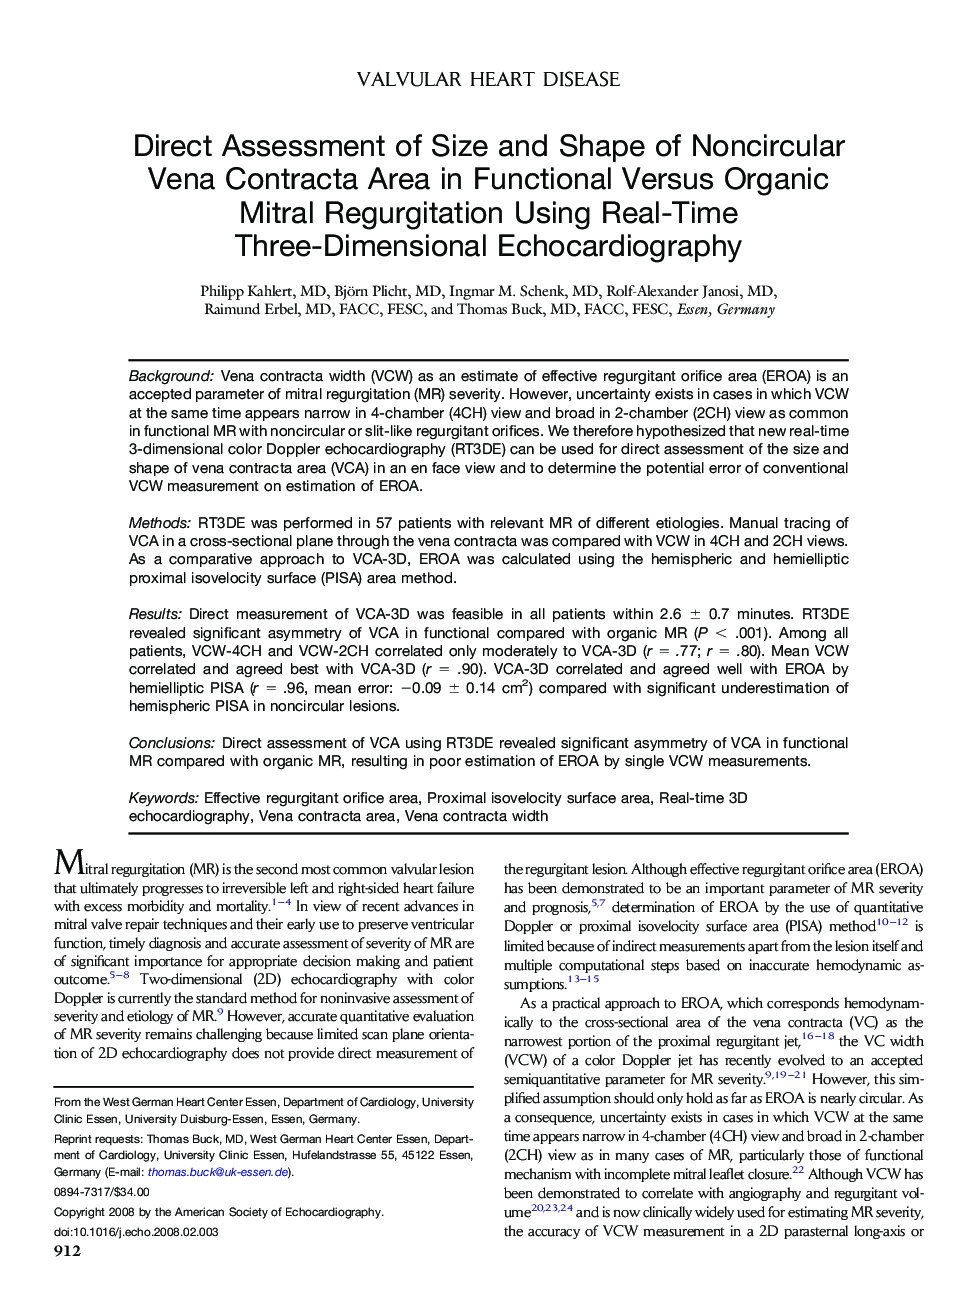 Direct Assessment of Size and Shape of Noncircular Vena Contracta Area in Functional Versus Organic Mitral Regurgitation Using Real-Time Three-Dimensional Echocardiography